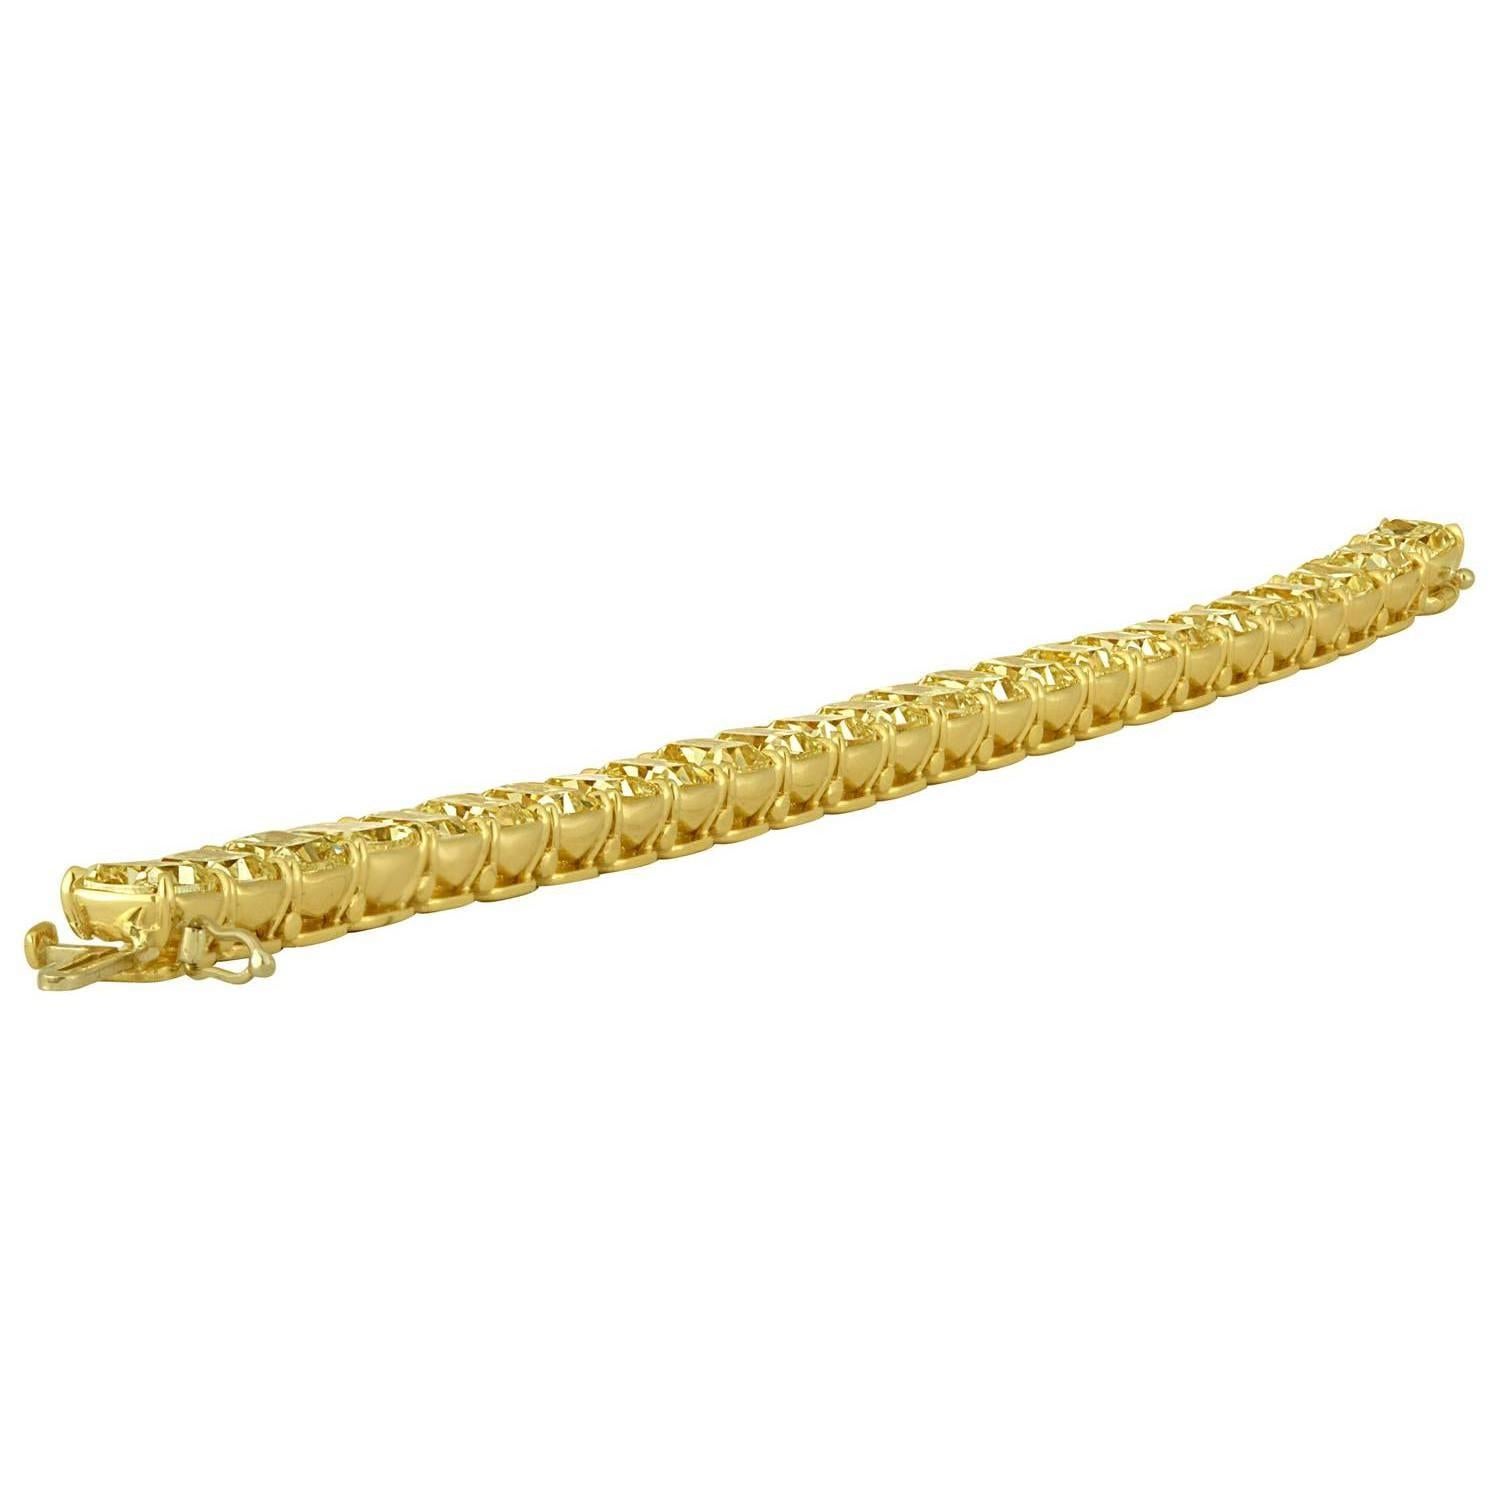 25 Yellow Diamonds Cushion Cut weighting 38.12 Carat Total Weight are set in Hand Made 18K Yellow Bracelet Mounting. The Ultimate setting for a Classical Bracelet that makes a statement by itself. The Diamonds are Not Certified, however they are